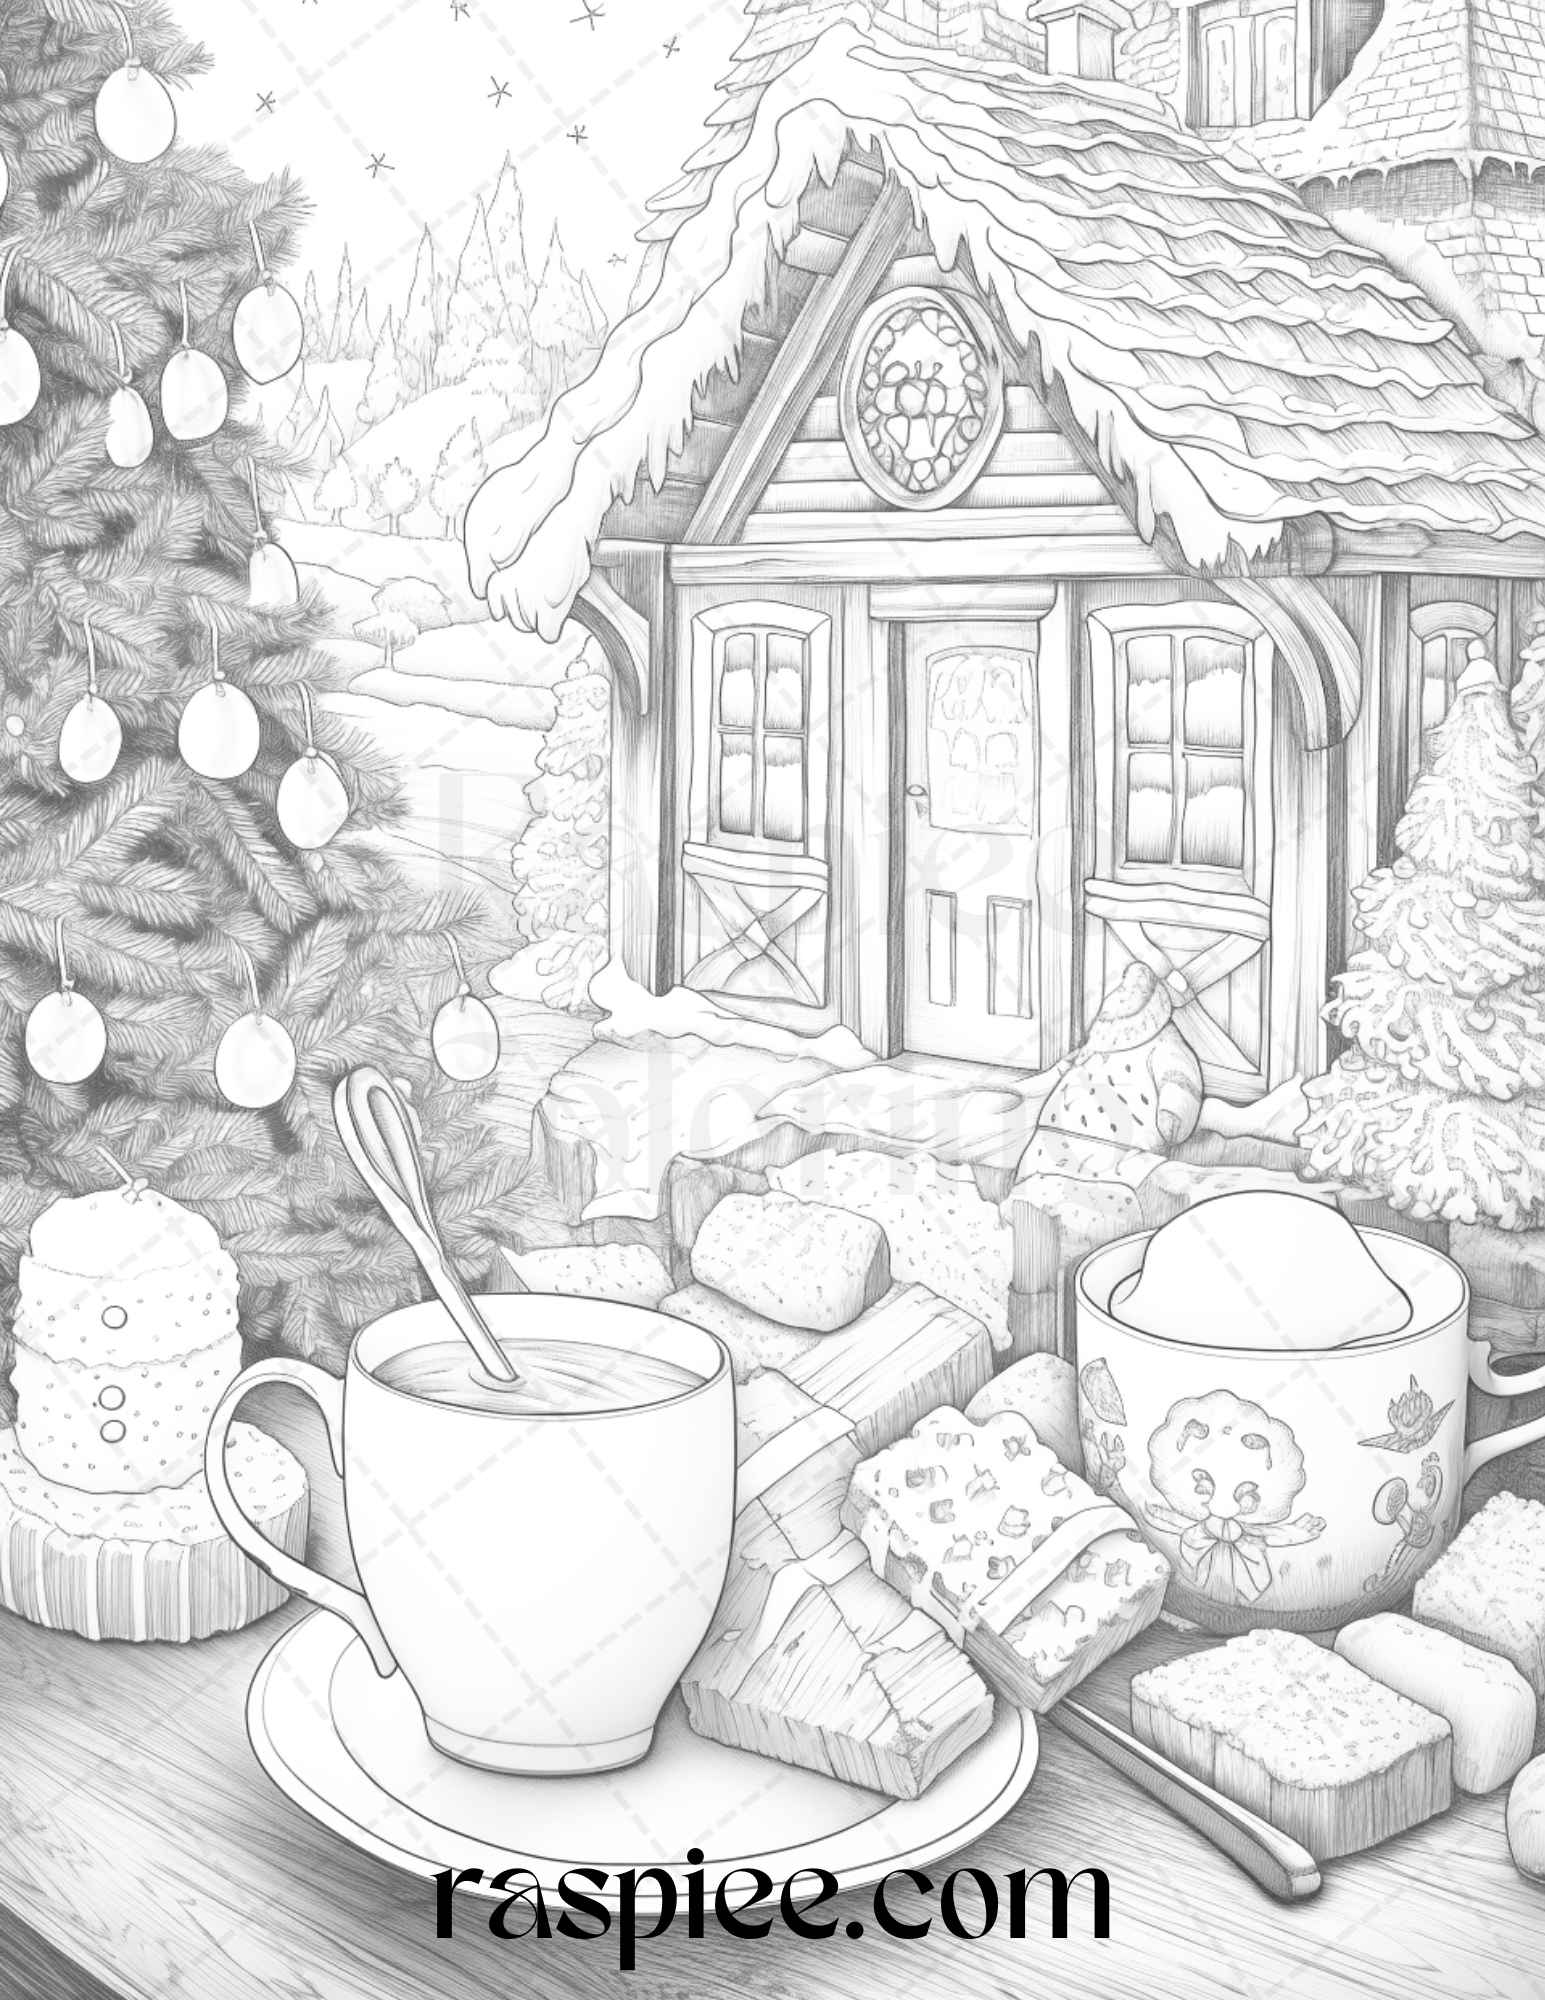 Christmas coloring pages for adults, Printable grayscale coloring sheets, Adult holiday coloring book, Merry Christmas grayscale prints, Relaxing holiday art for adults